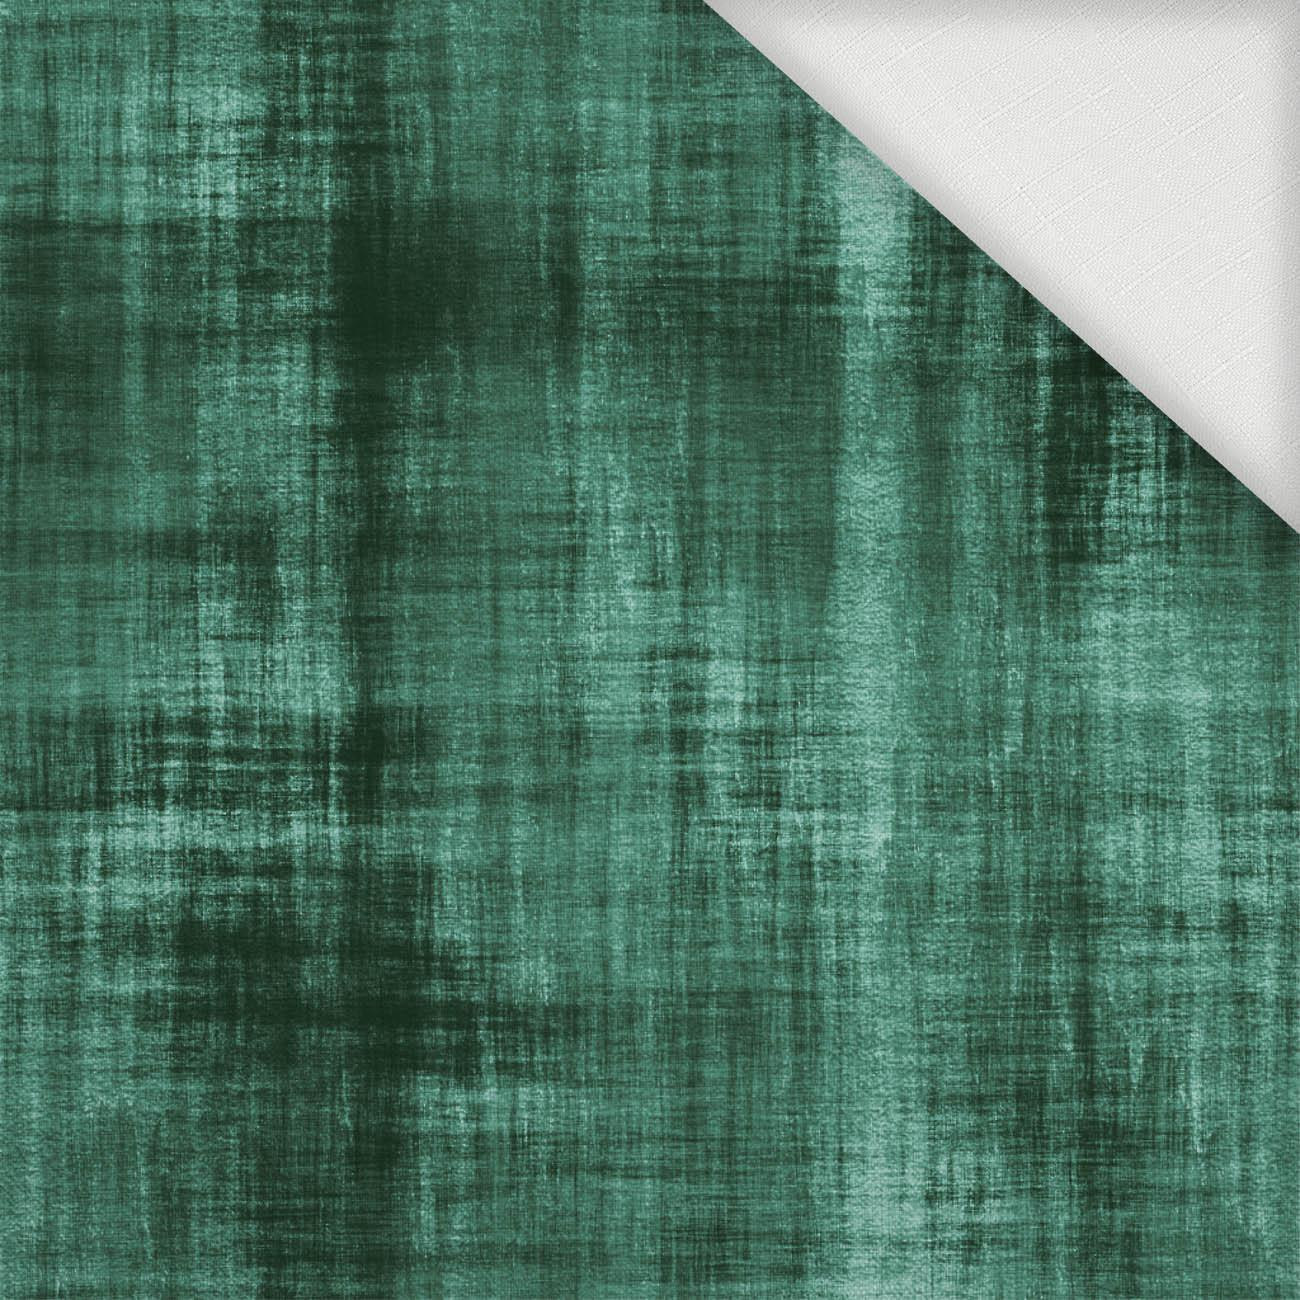 ACID WASH PAT. 2 (bottled green) - Woven Fabric for tablecloths